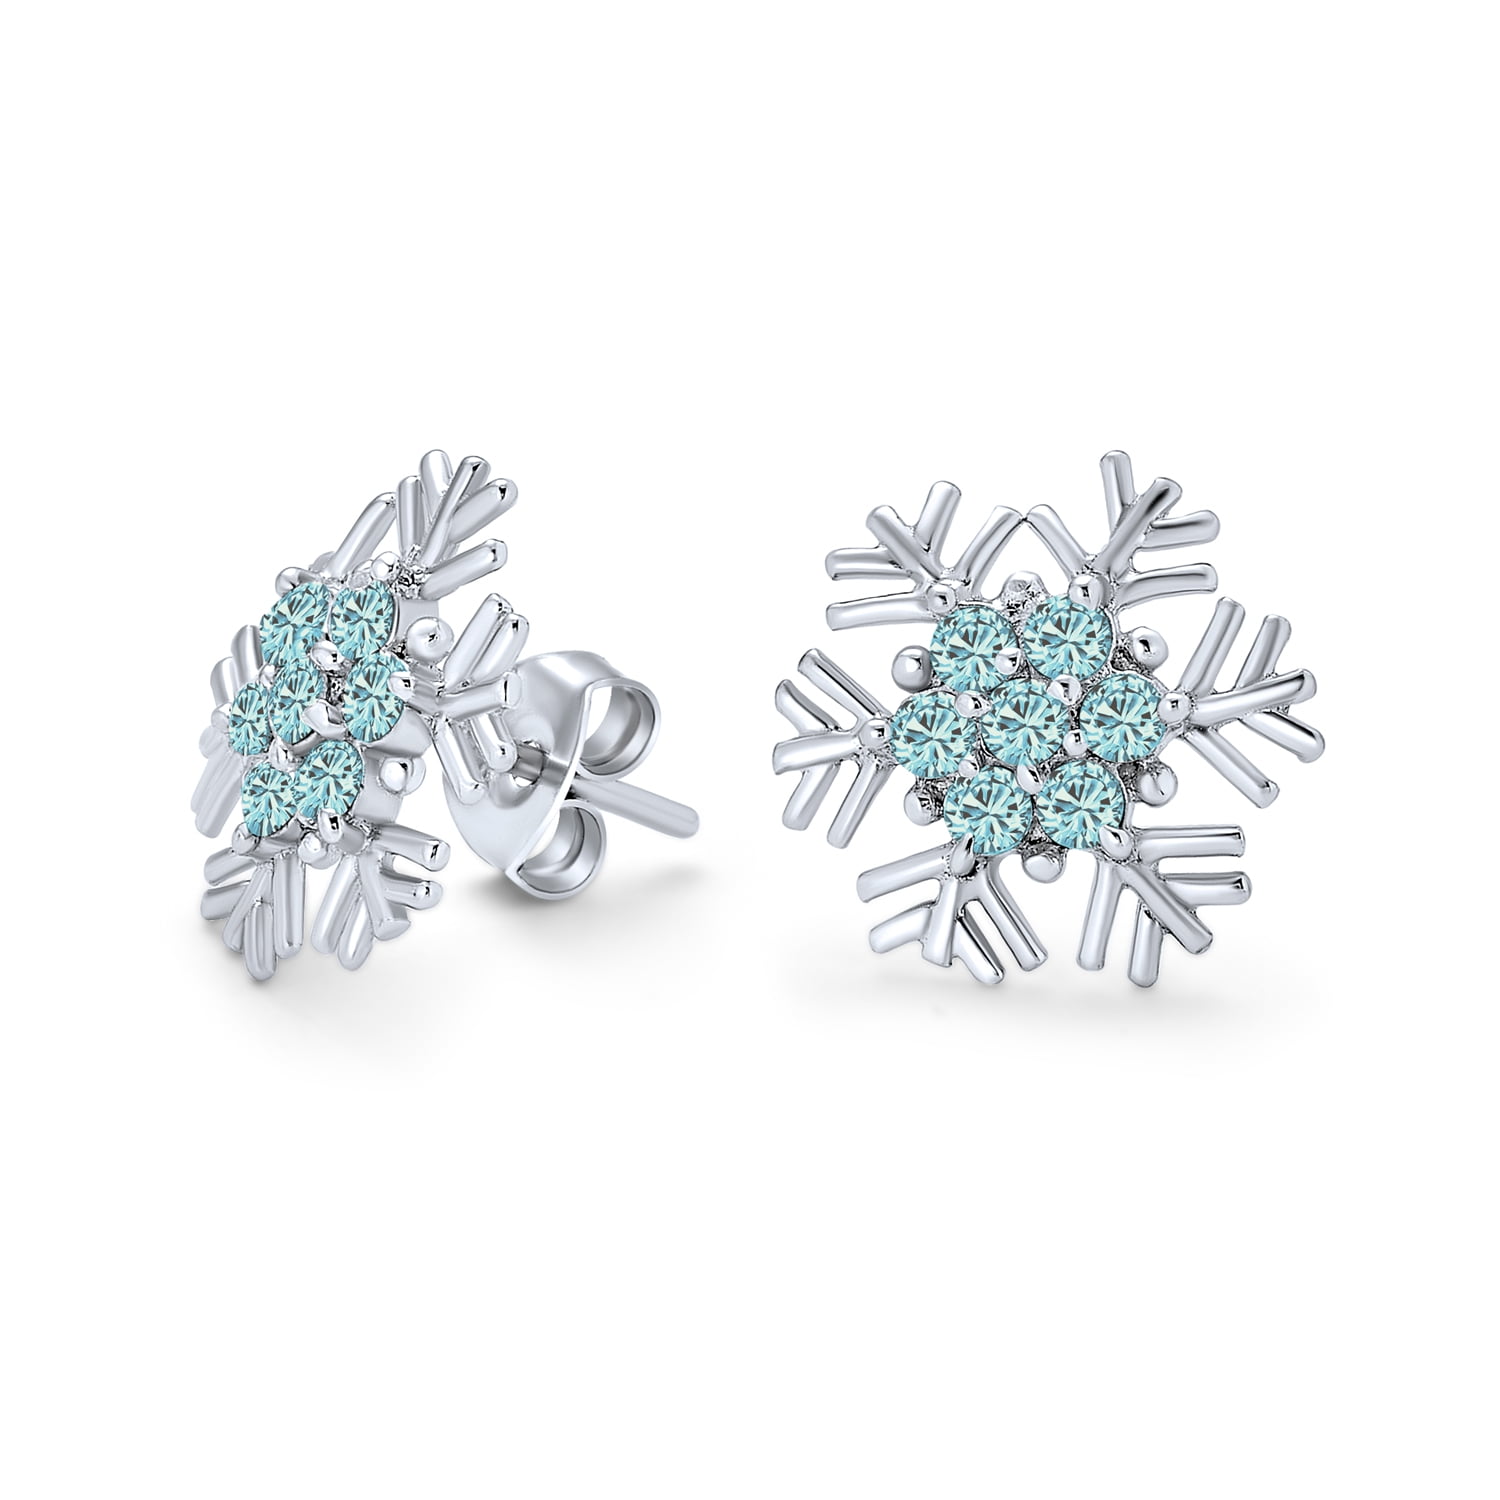 Icy Blue Snowflake Earrings-aqua glass-14k gold filled or sterling silver hooks 